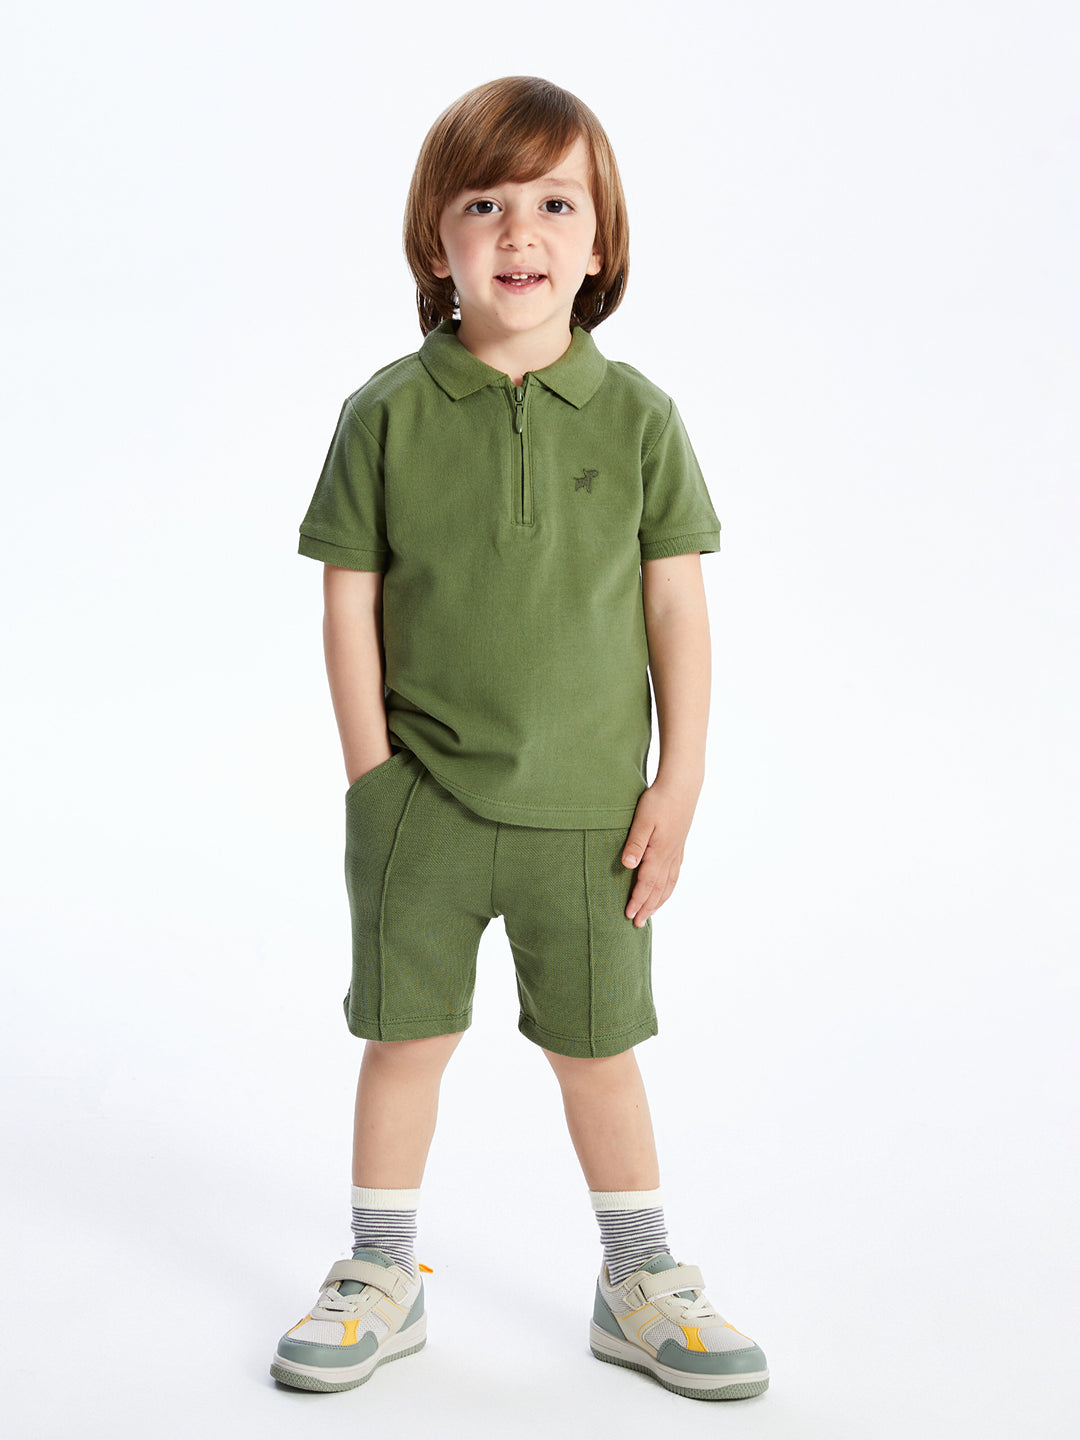 Polo Neck Embroidered Baby Boy T-Shirt and Shorts Set of 2